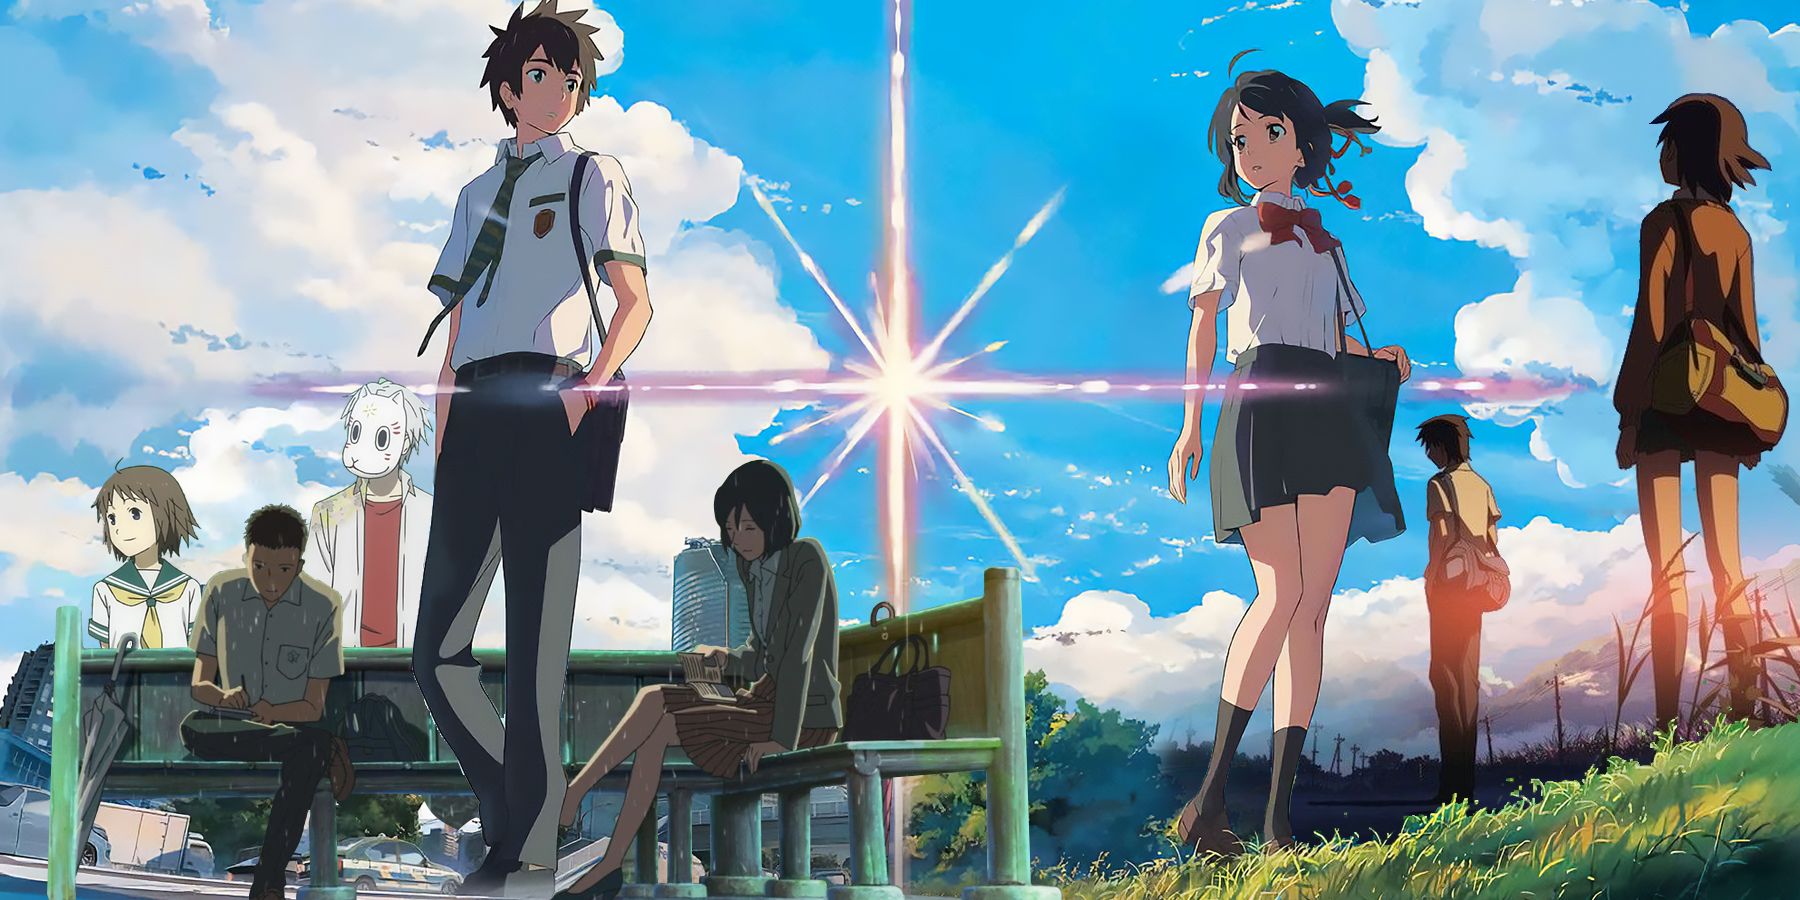 Best Anime Movies Like Your Name